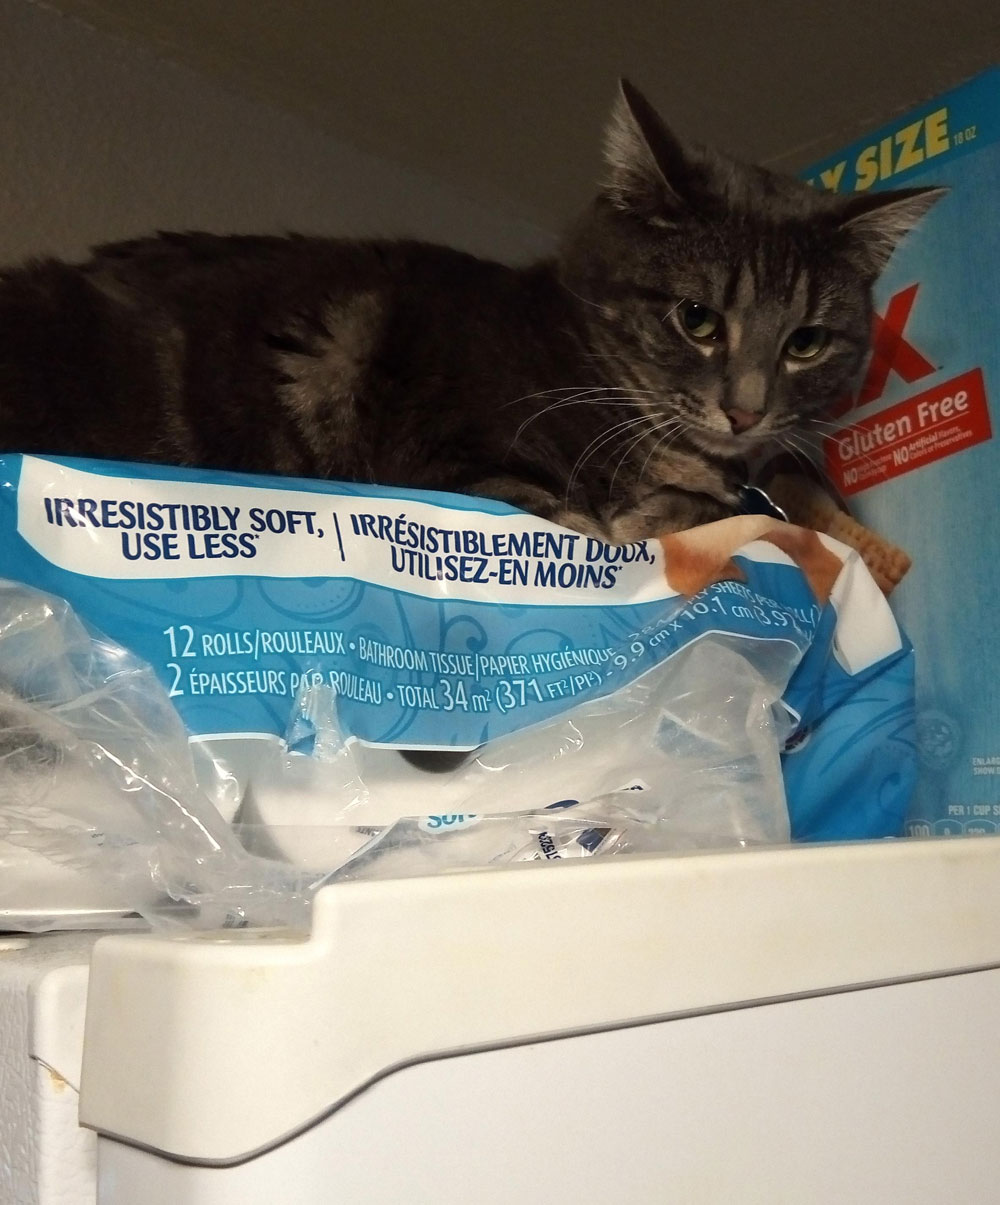 This package of toilet paper my cat likes to lay on describes her perfectly